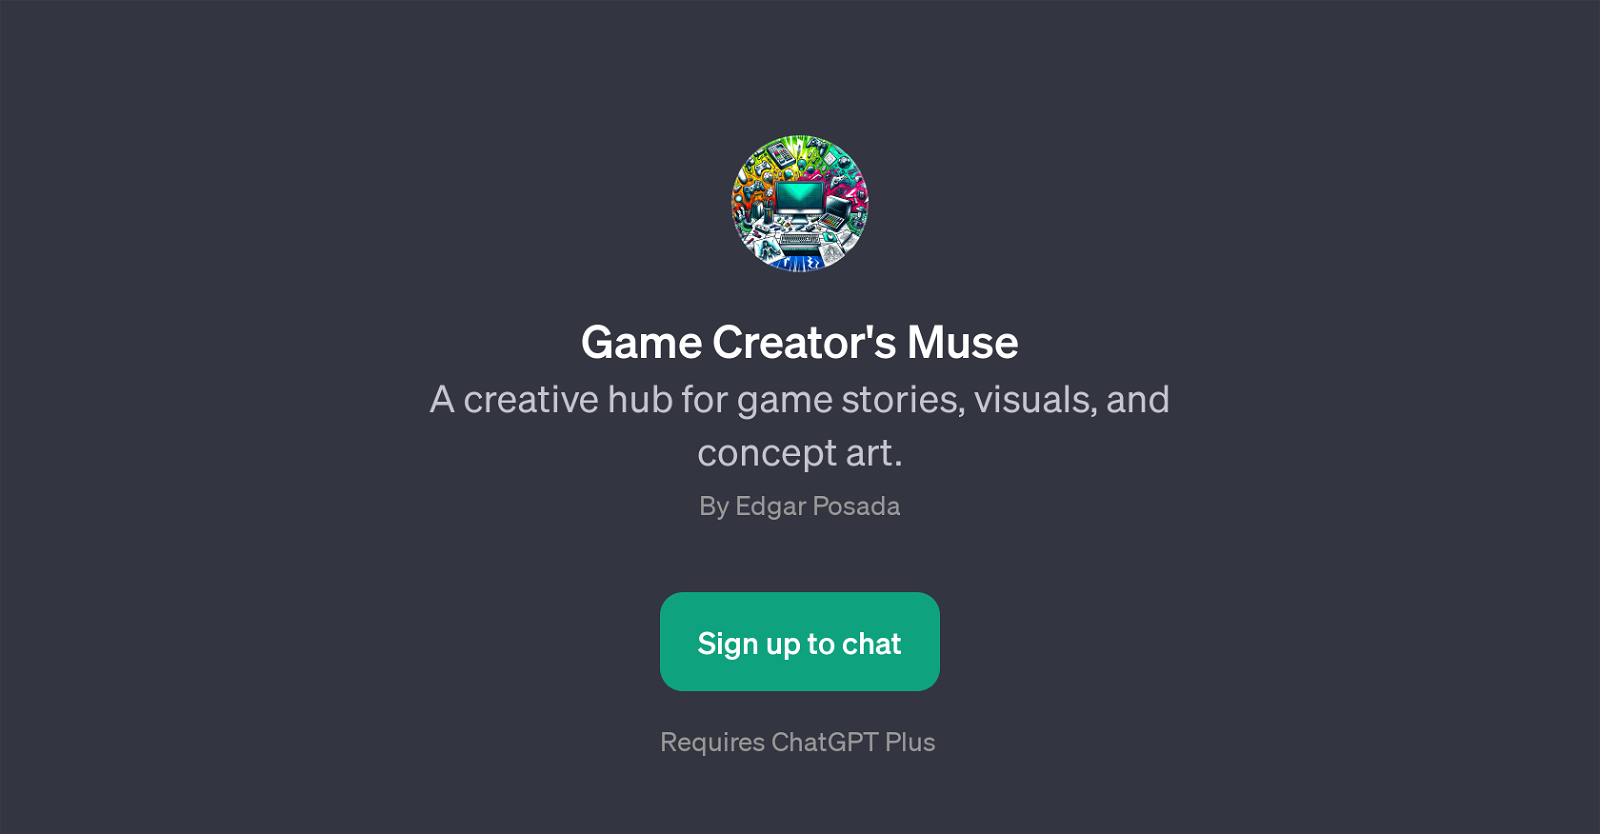 Game Creator's Muse website